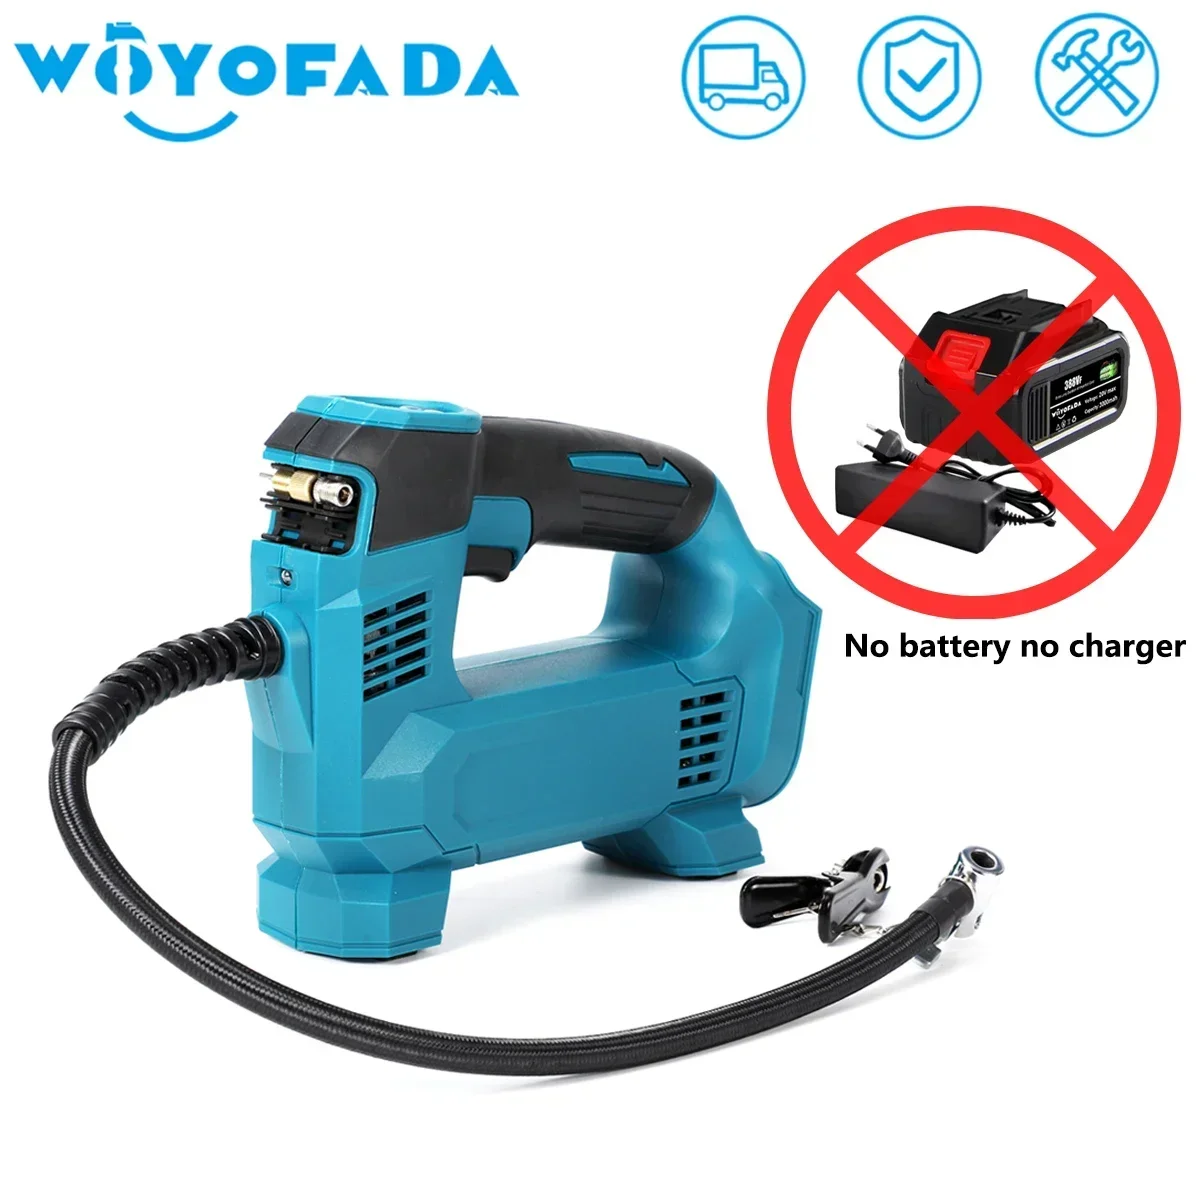 WOYOFADA Cordless Portable Electric Air Pump Car Tire Inflator Air Compressor For Car Bicycle Tires Balls For Makita 18V Battery sell all kinds bicycle frame wheel fork parts light tires handlebar battery rank accessories electric bicycle kit